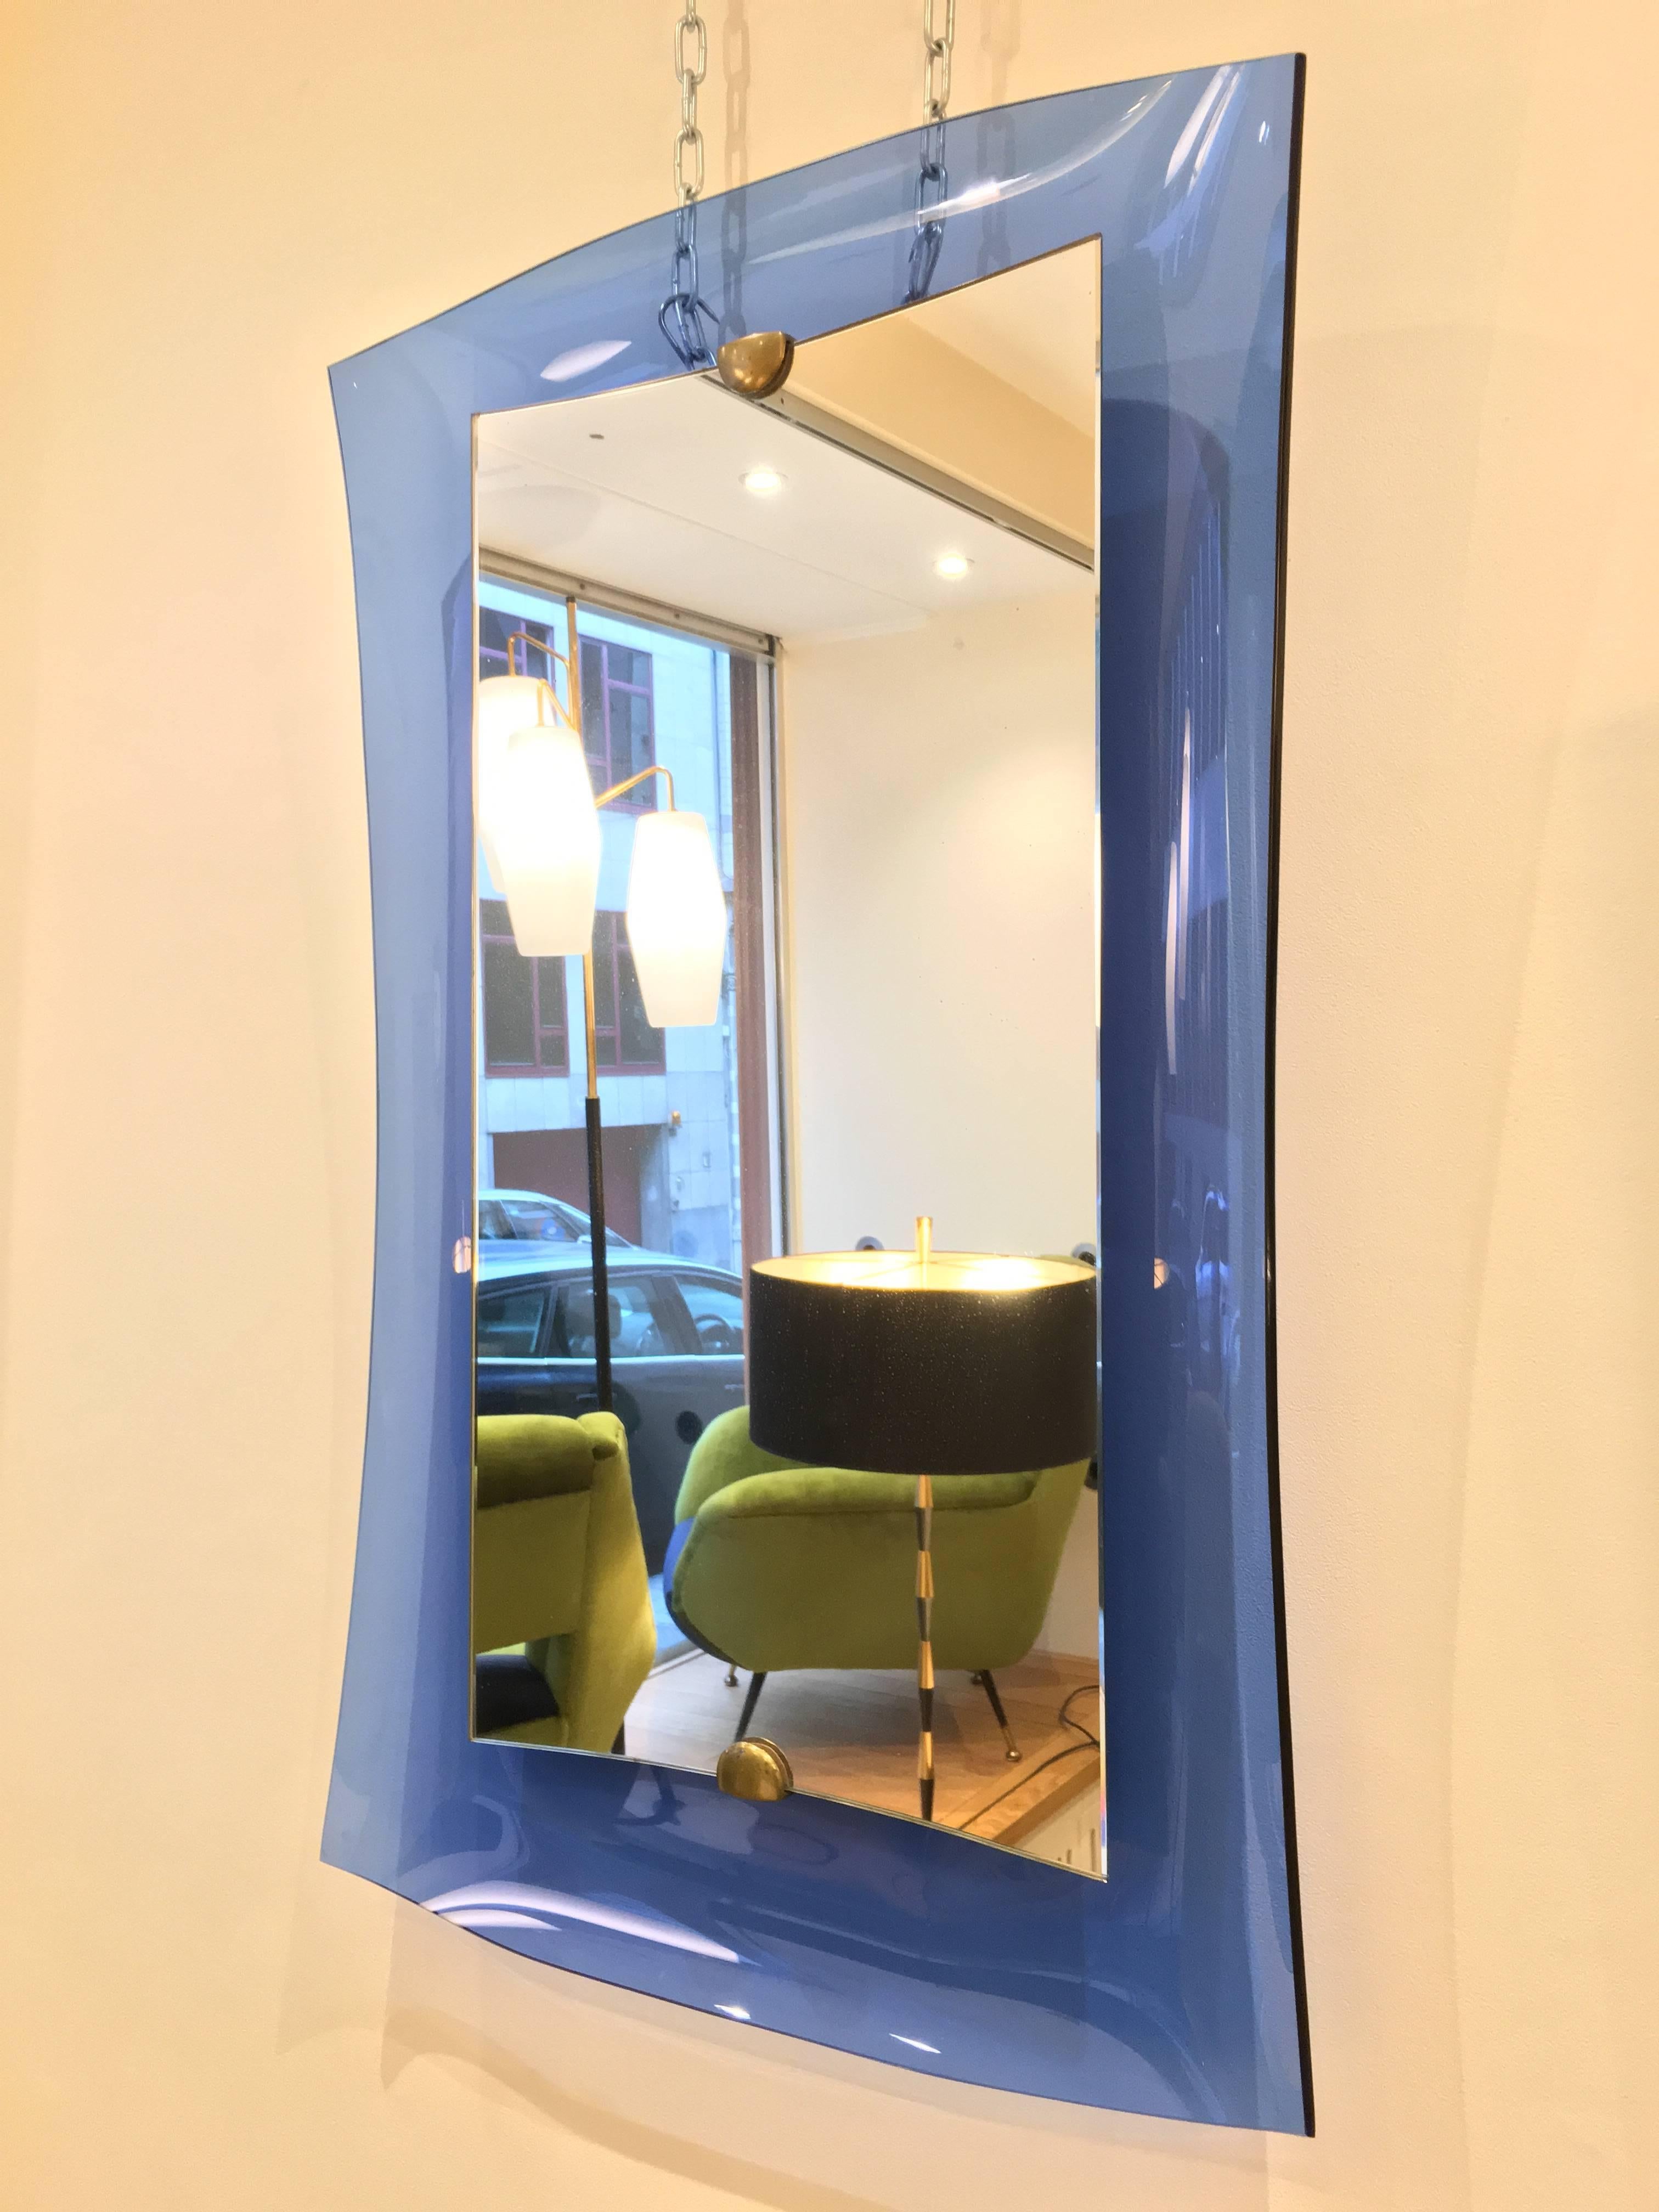 The blue color is quite rare, as is this type of mirror. The mirror is very interesting regarding its curves and concave shape. This gives a splendid decorative aspect to the piece. Equally, it is a technical prowess to achieve such a work in Glass.